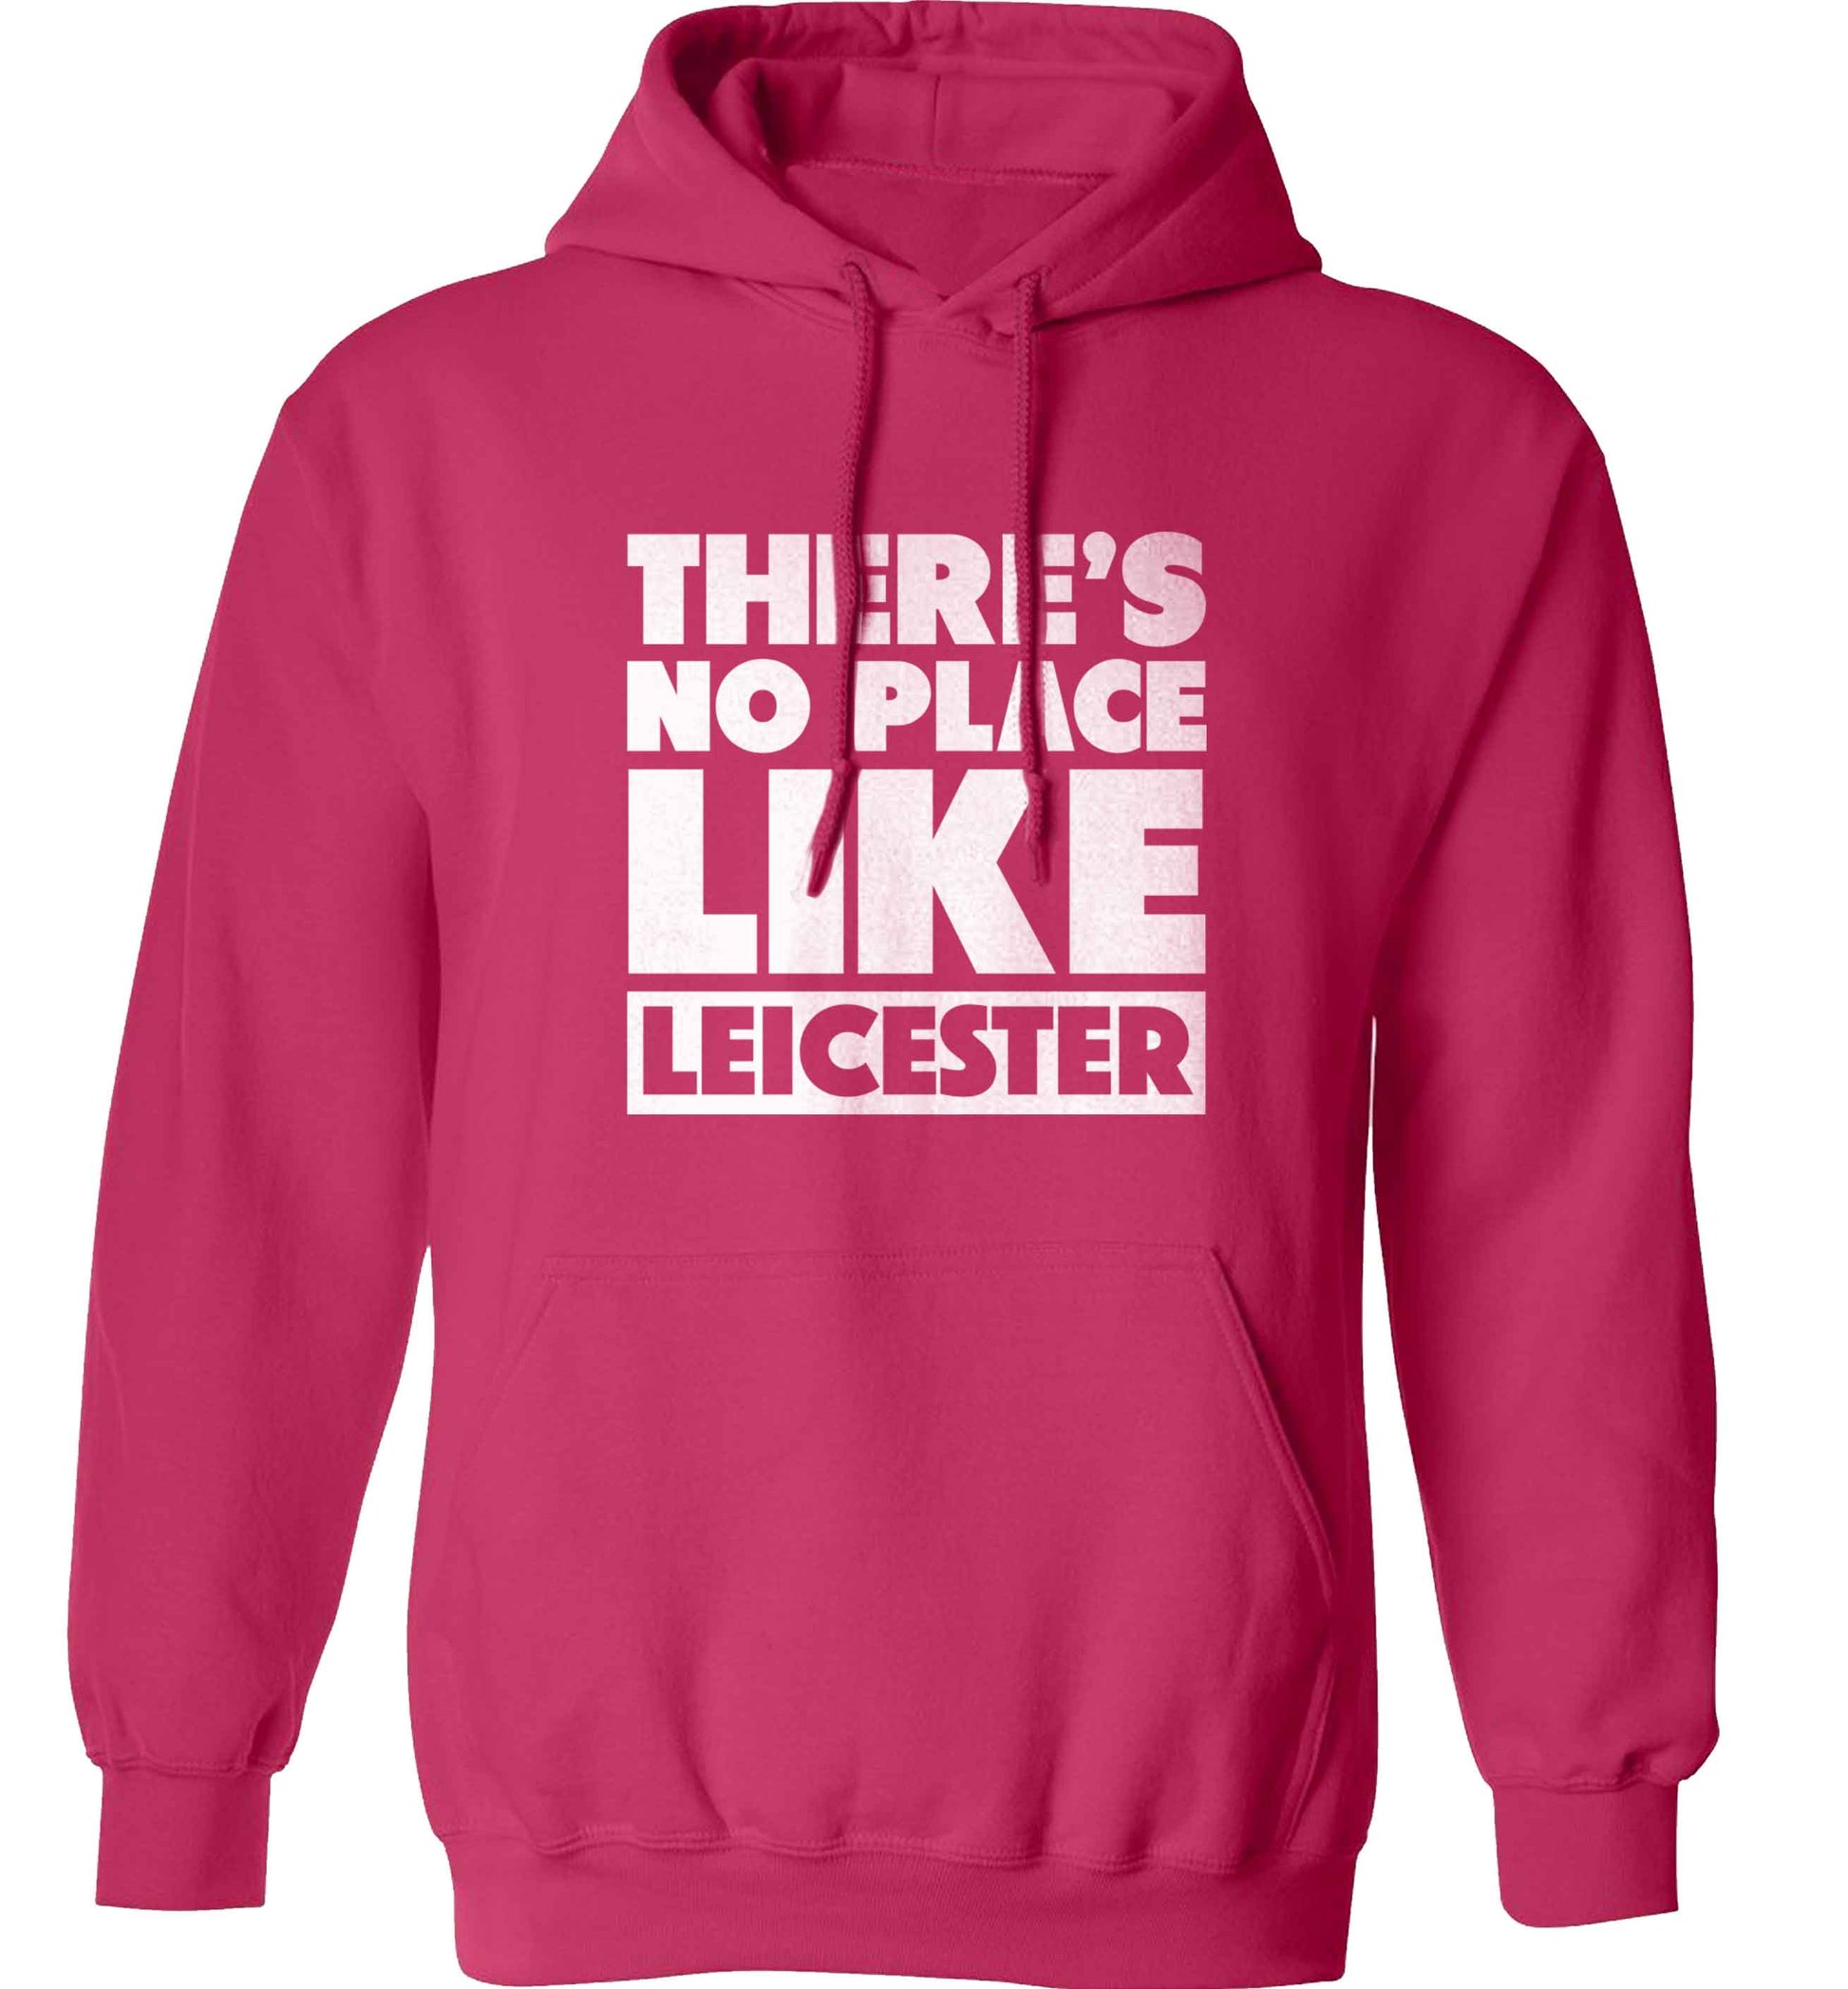 There's no place like Leicester adults unisex pink hoodie 2XL